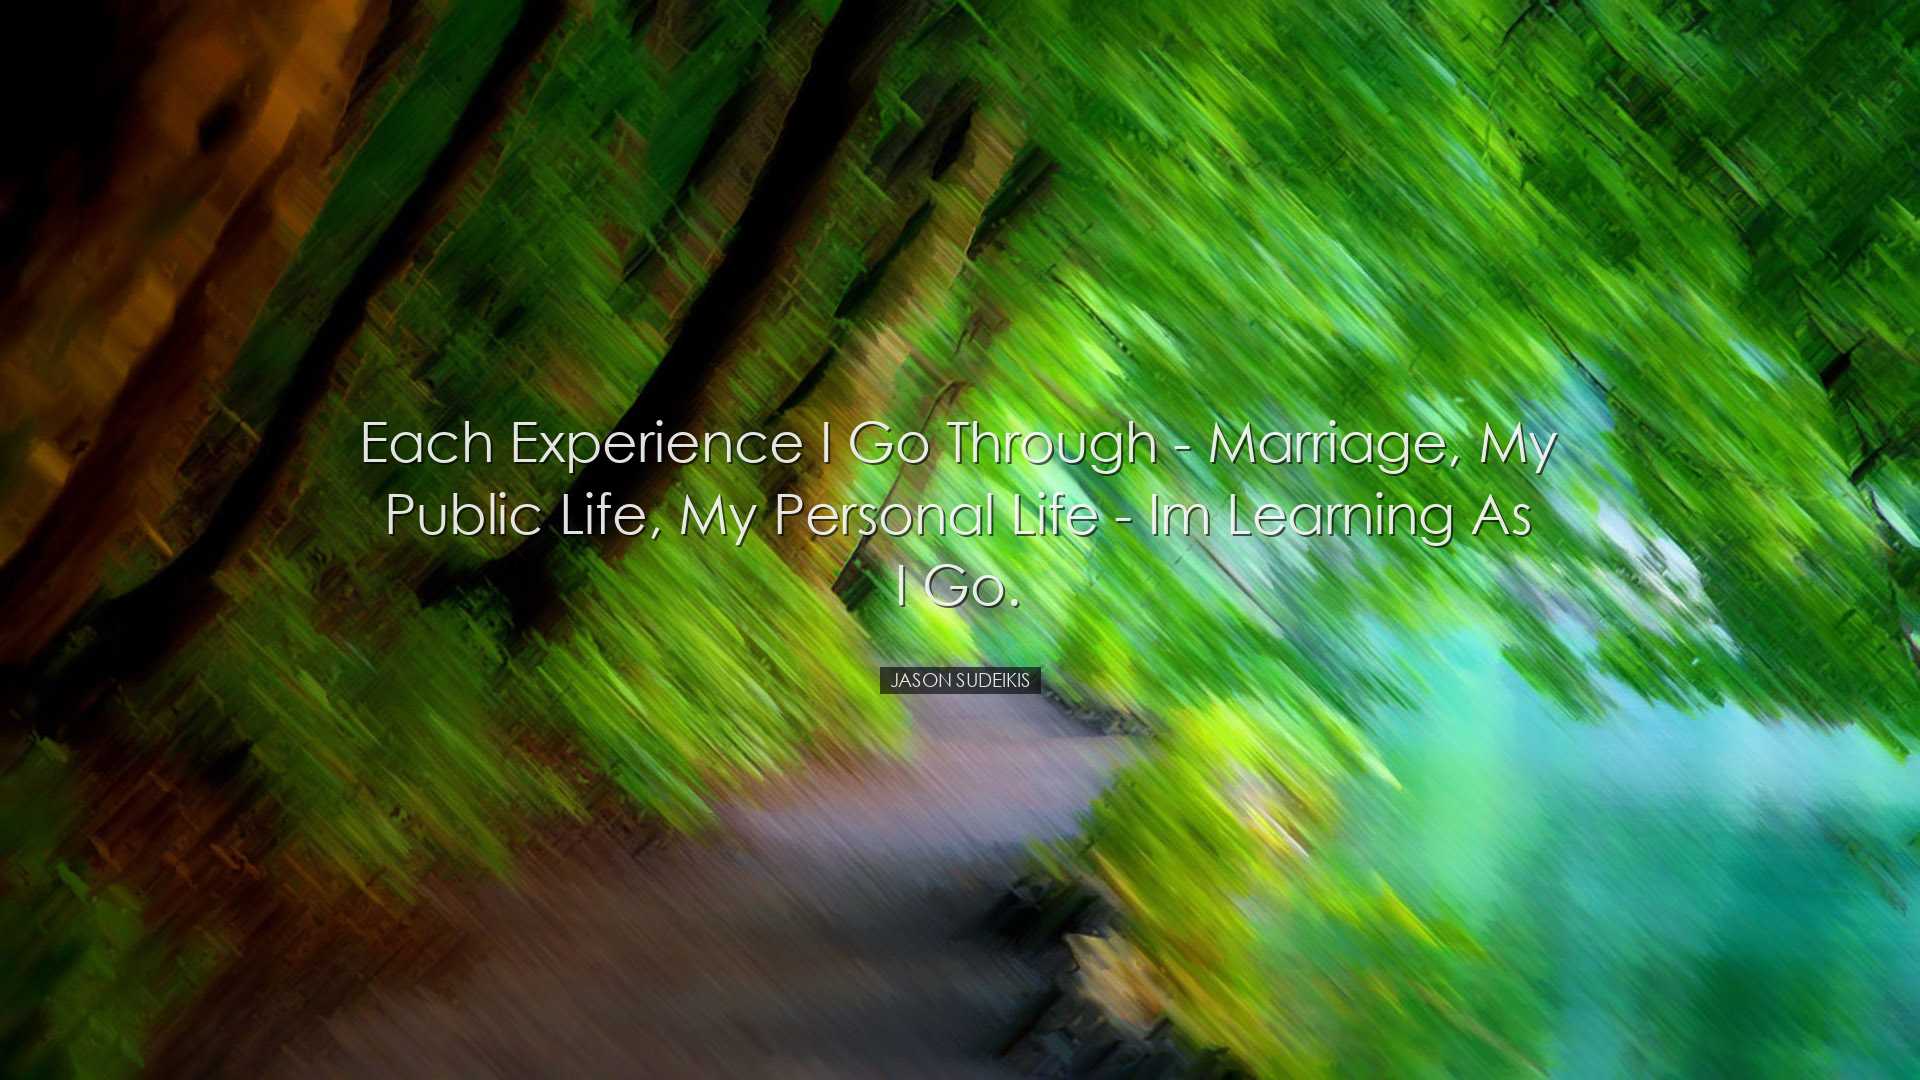 Each experience I go through - marriage, my public life, my person